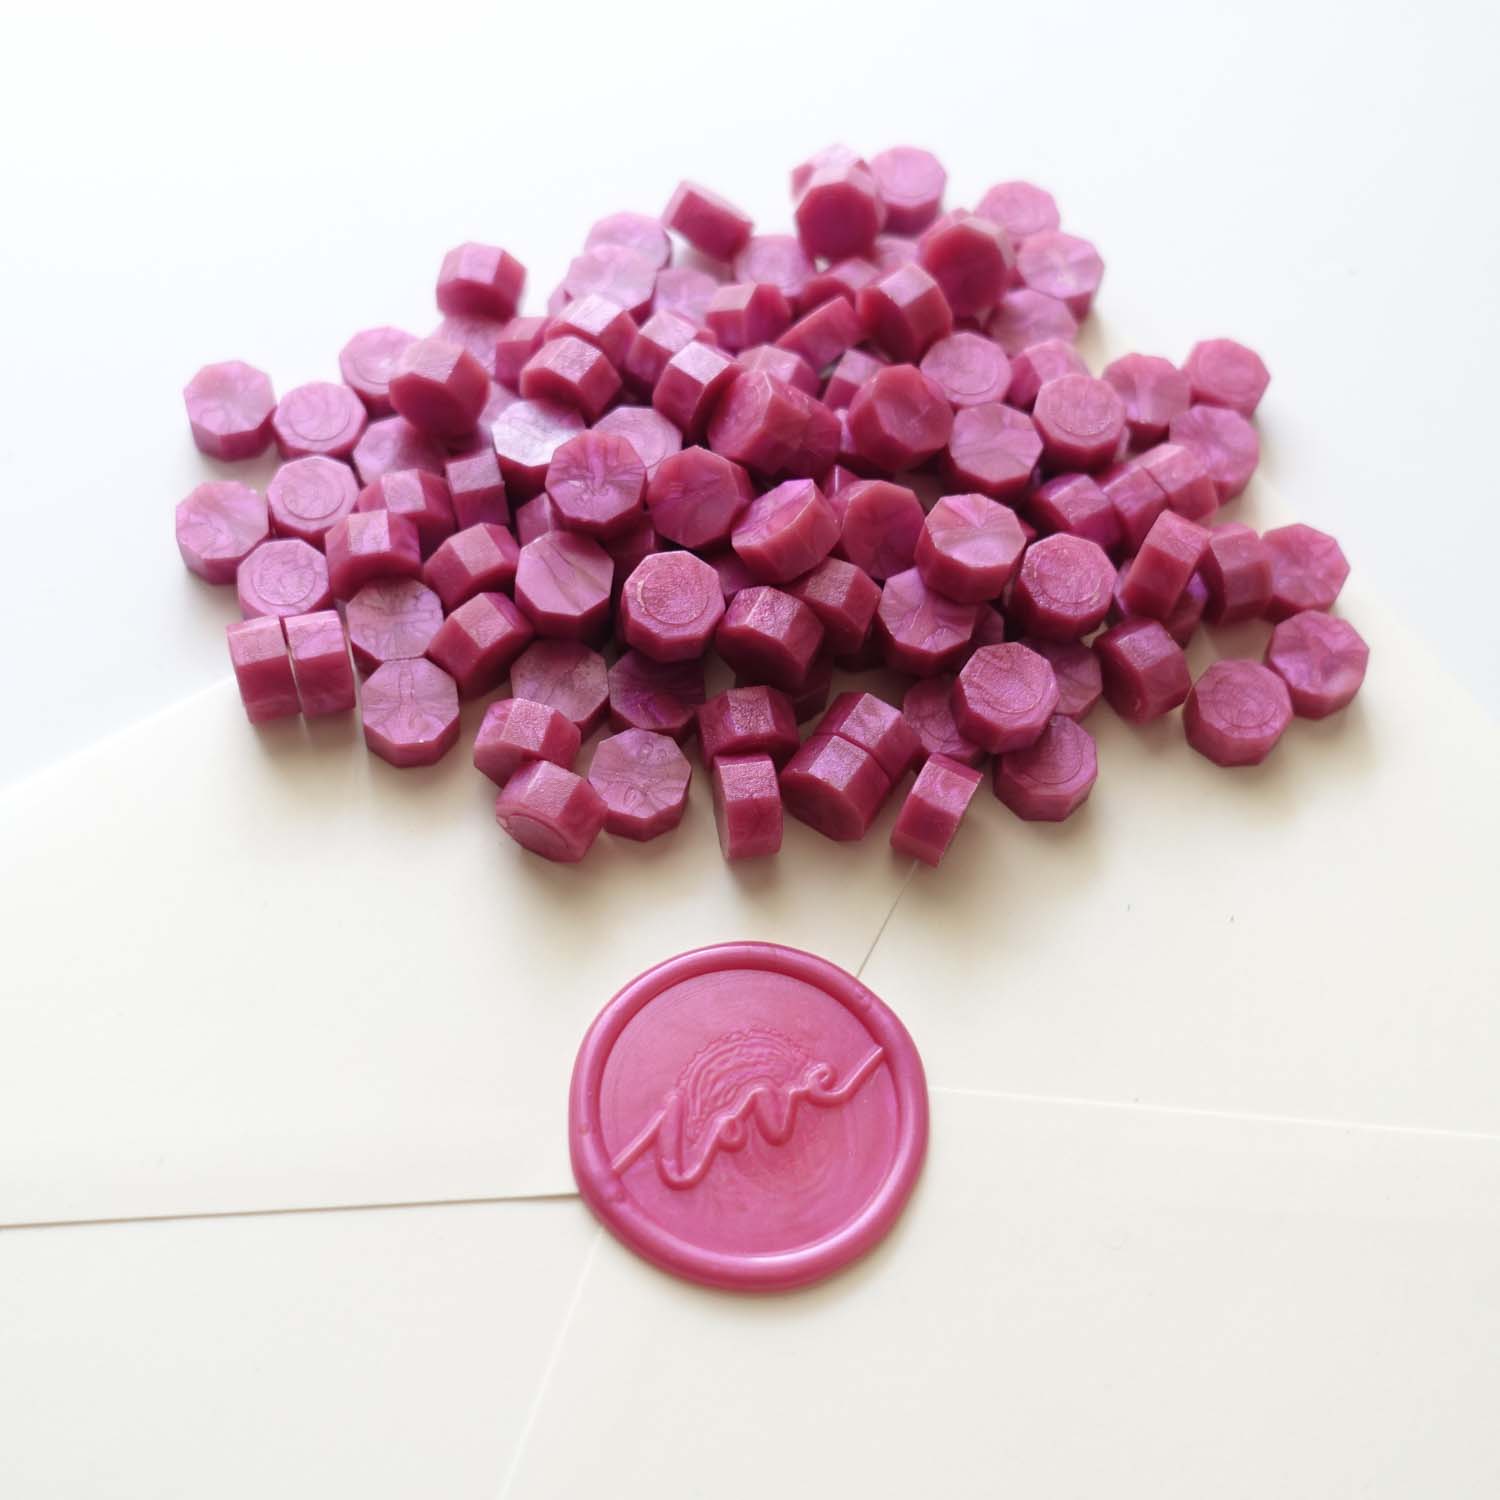 fuchsia hot bright pink sealing wax beads with love wax seal on envelope australia